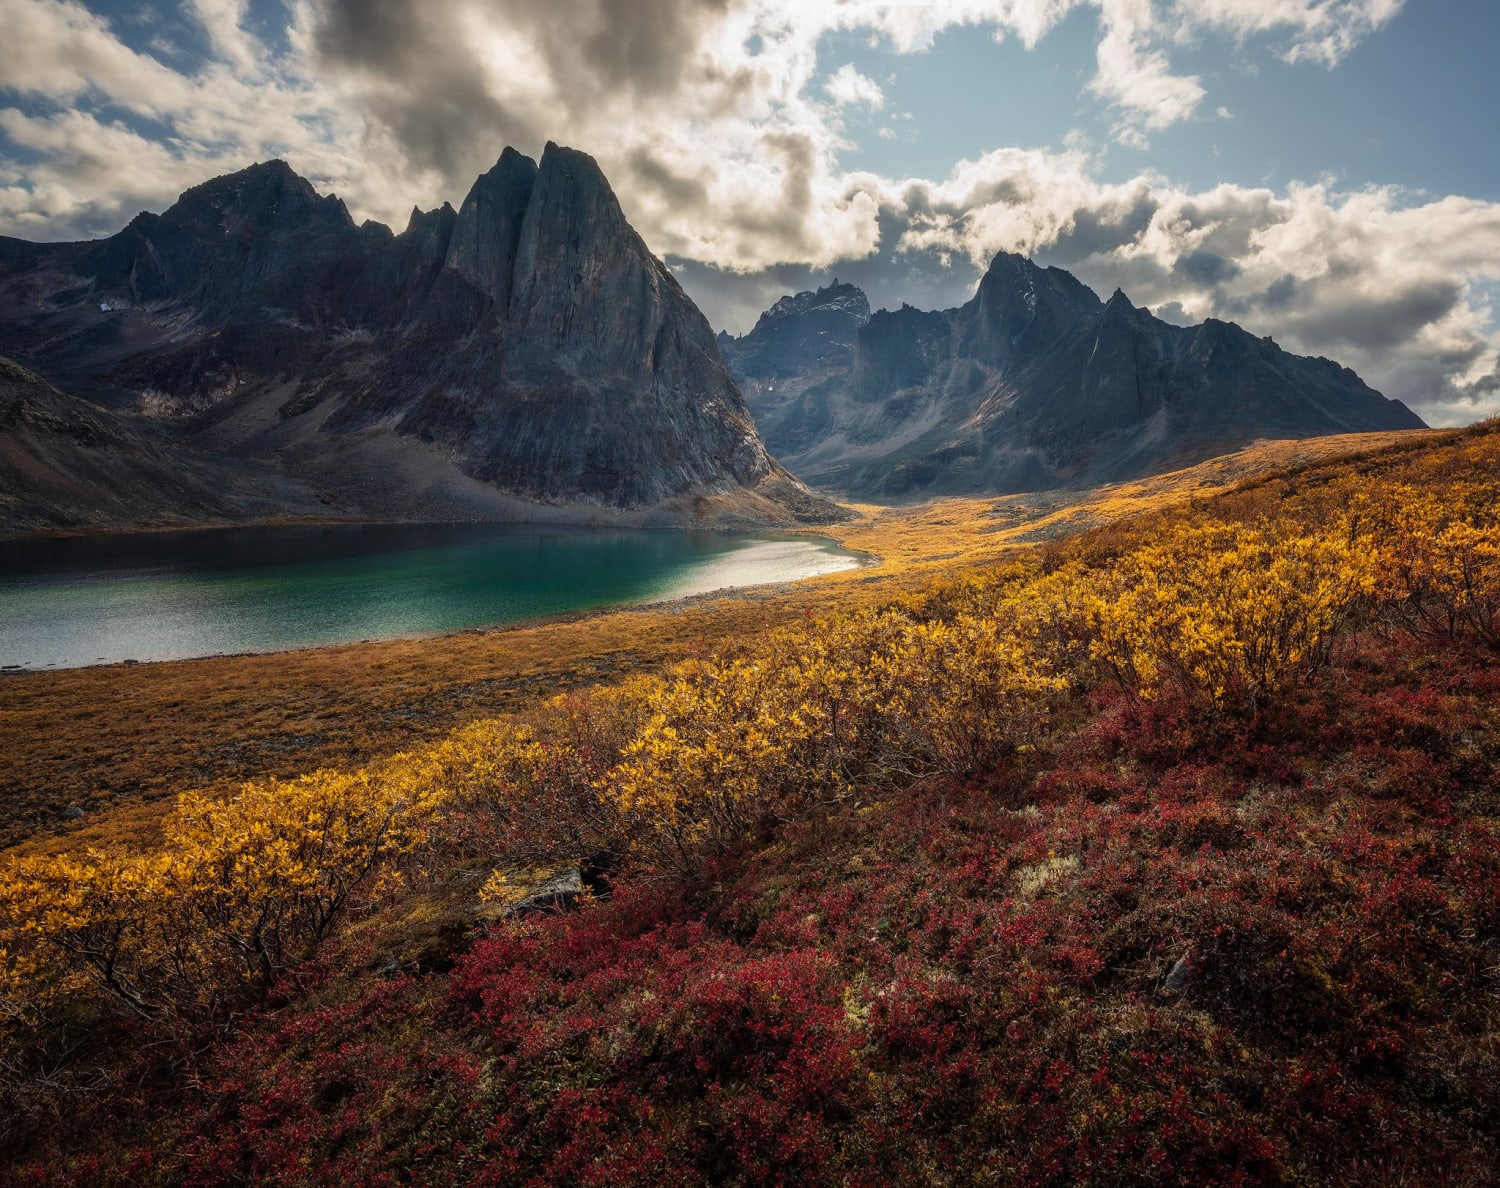 Dream-like conditions during autumn in the Yukon (Canada)